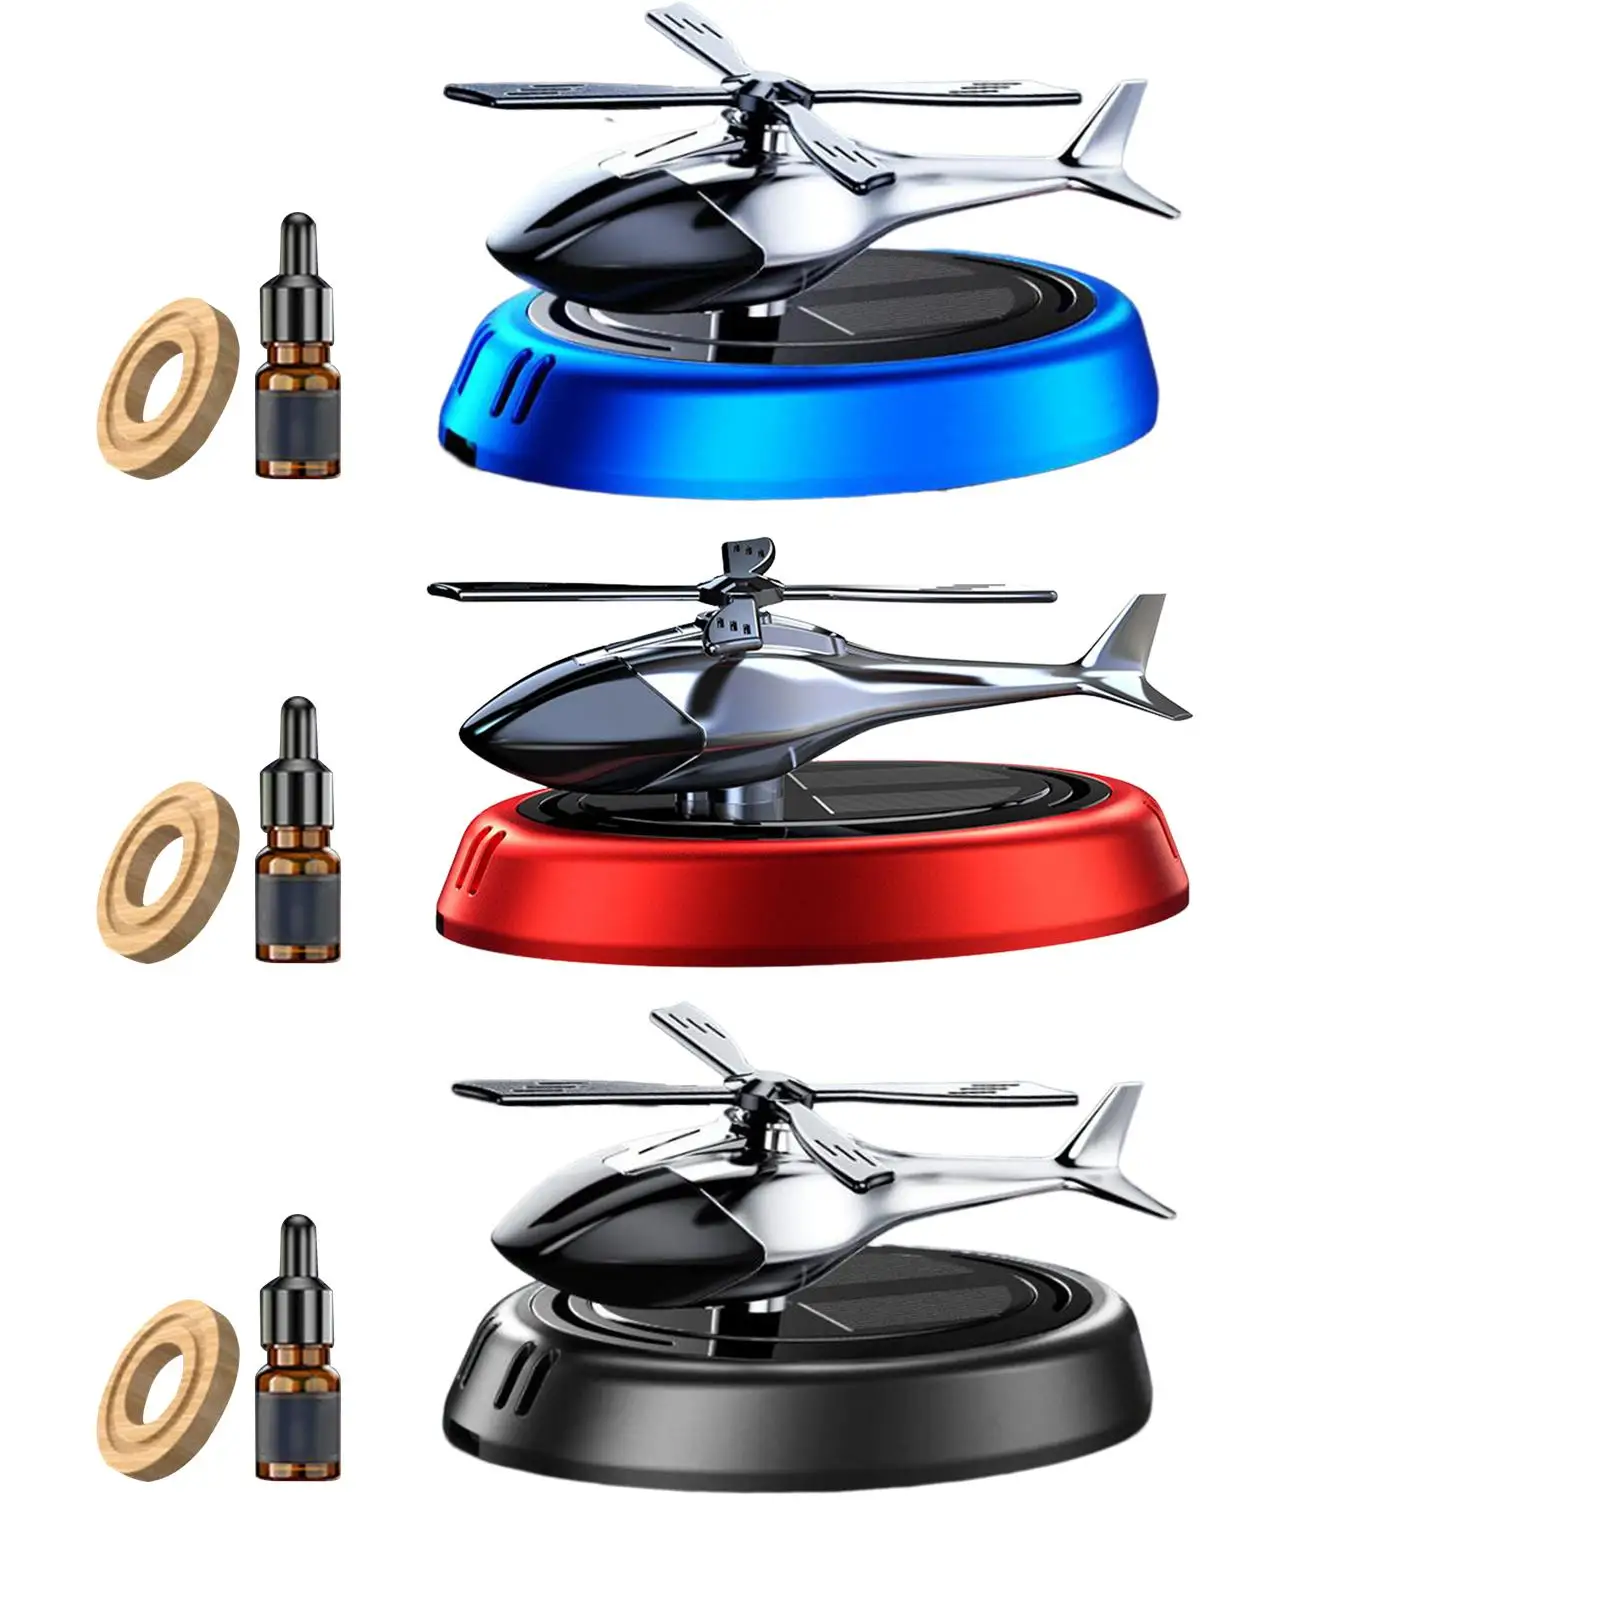 Solar mute Gift Solar Autorotation Dual Frequency Mode Perfume Diffuser Decor Helicopter Car Air Freshener